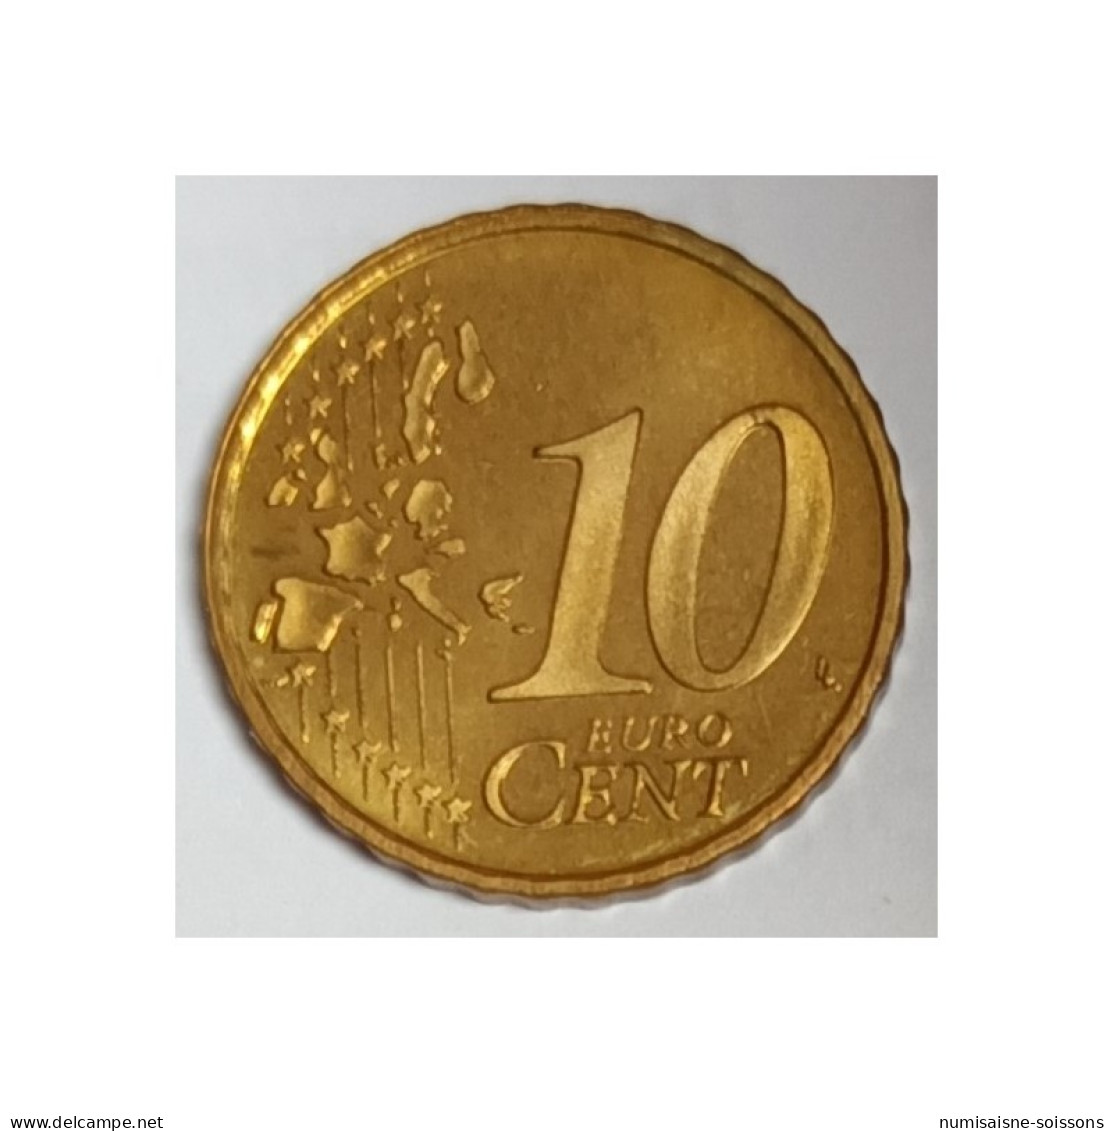 LUXEMBOURG - 10 CENT 2002 - GRAND DUC HENRI - SPL - Luxembourg